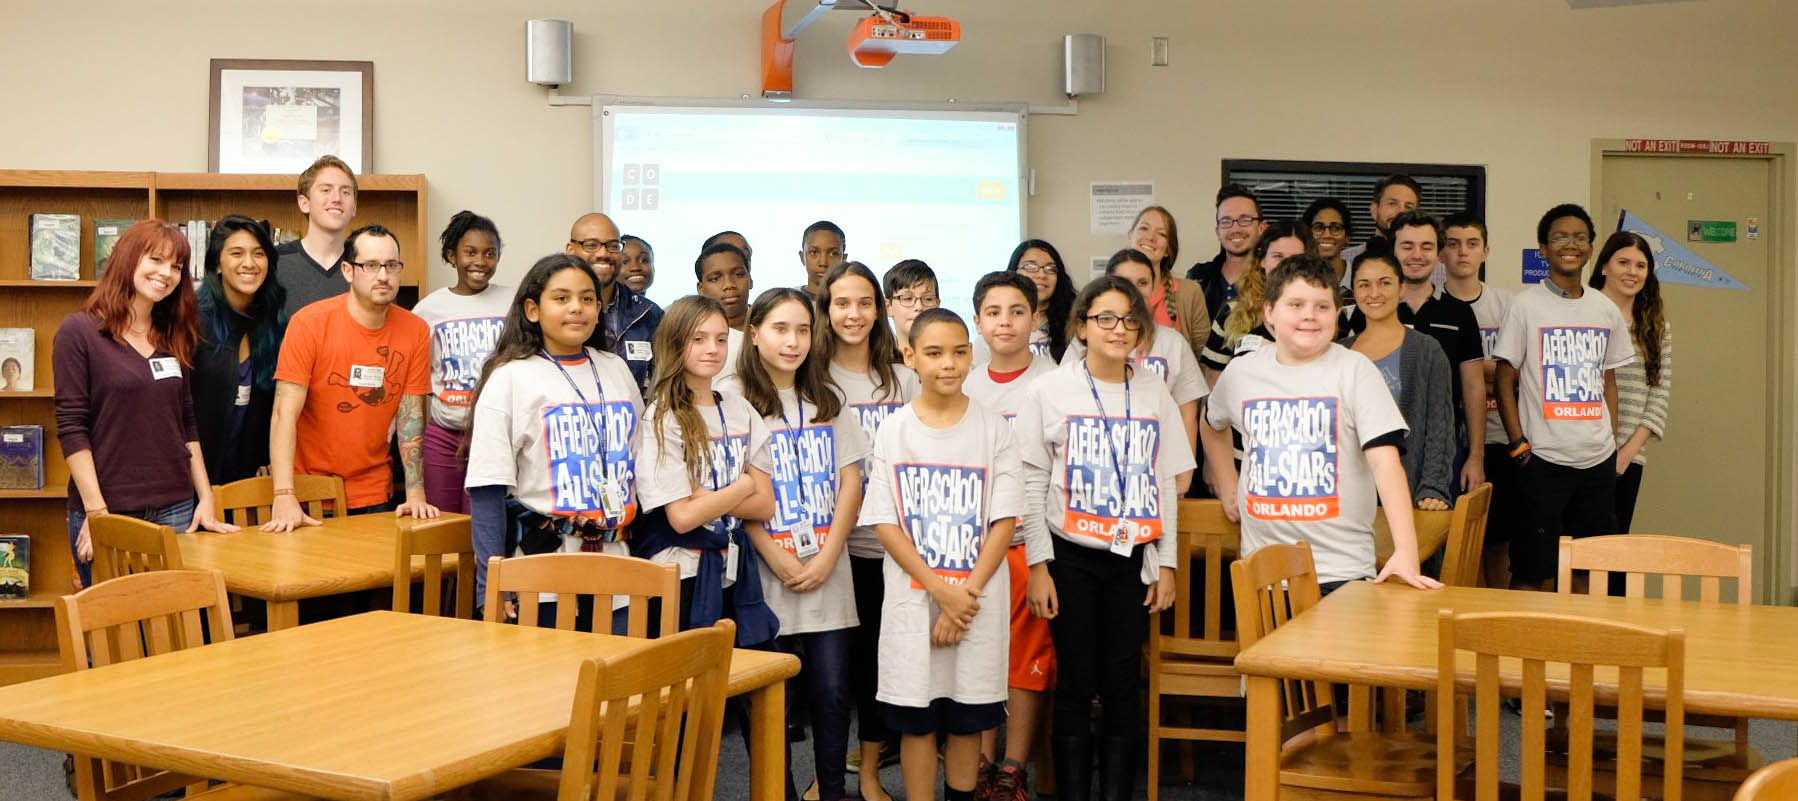 Hour of Code 2015: Teaching Orlando Middle School Students the Fundamentals of Programming